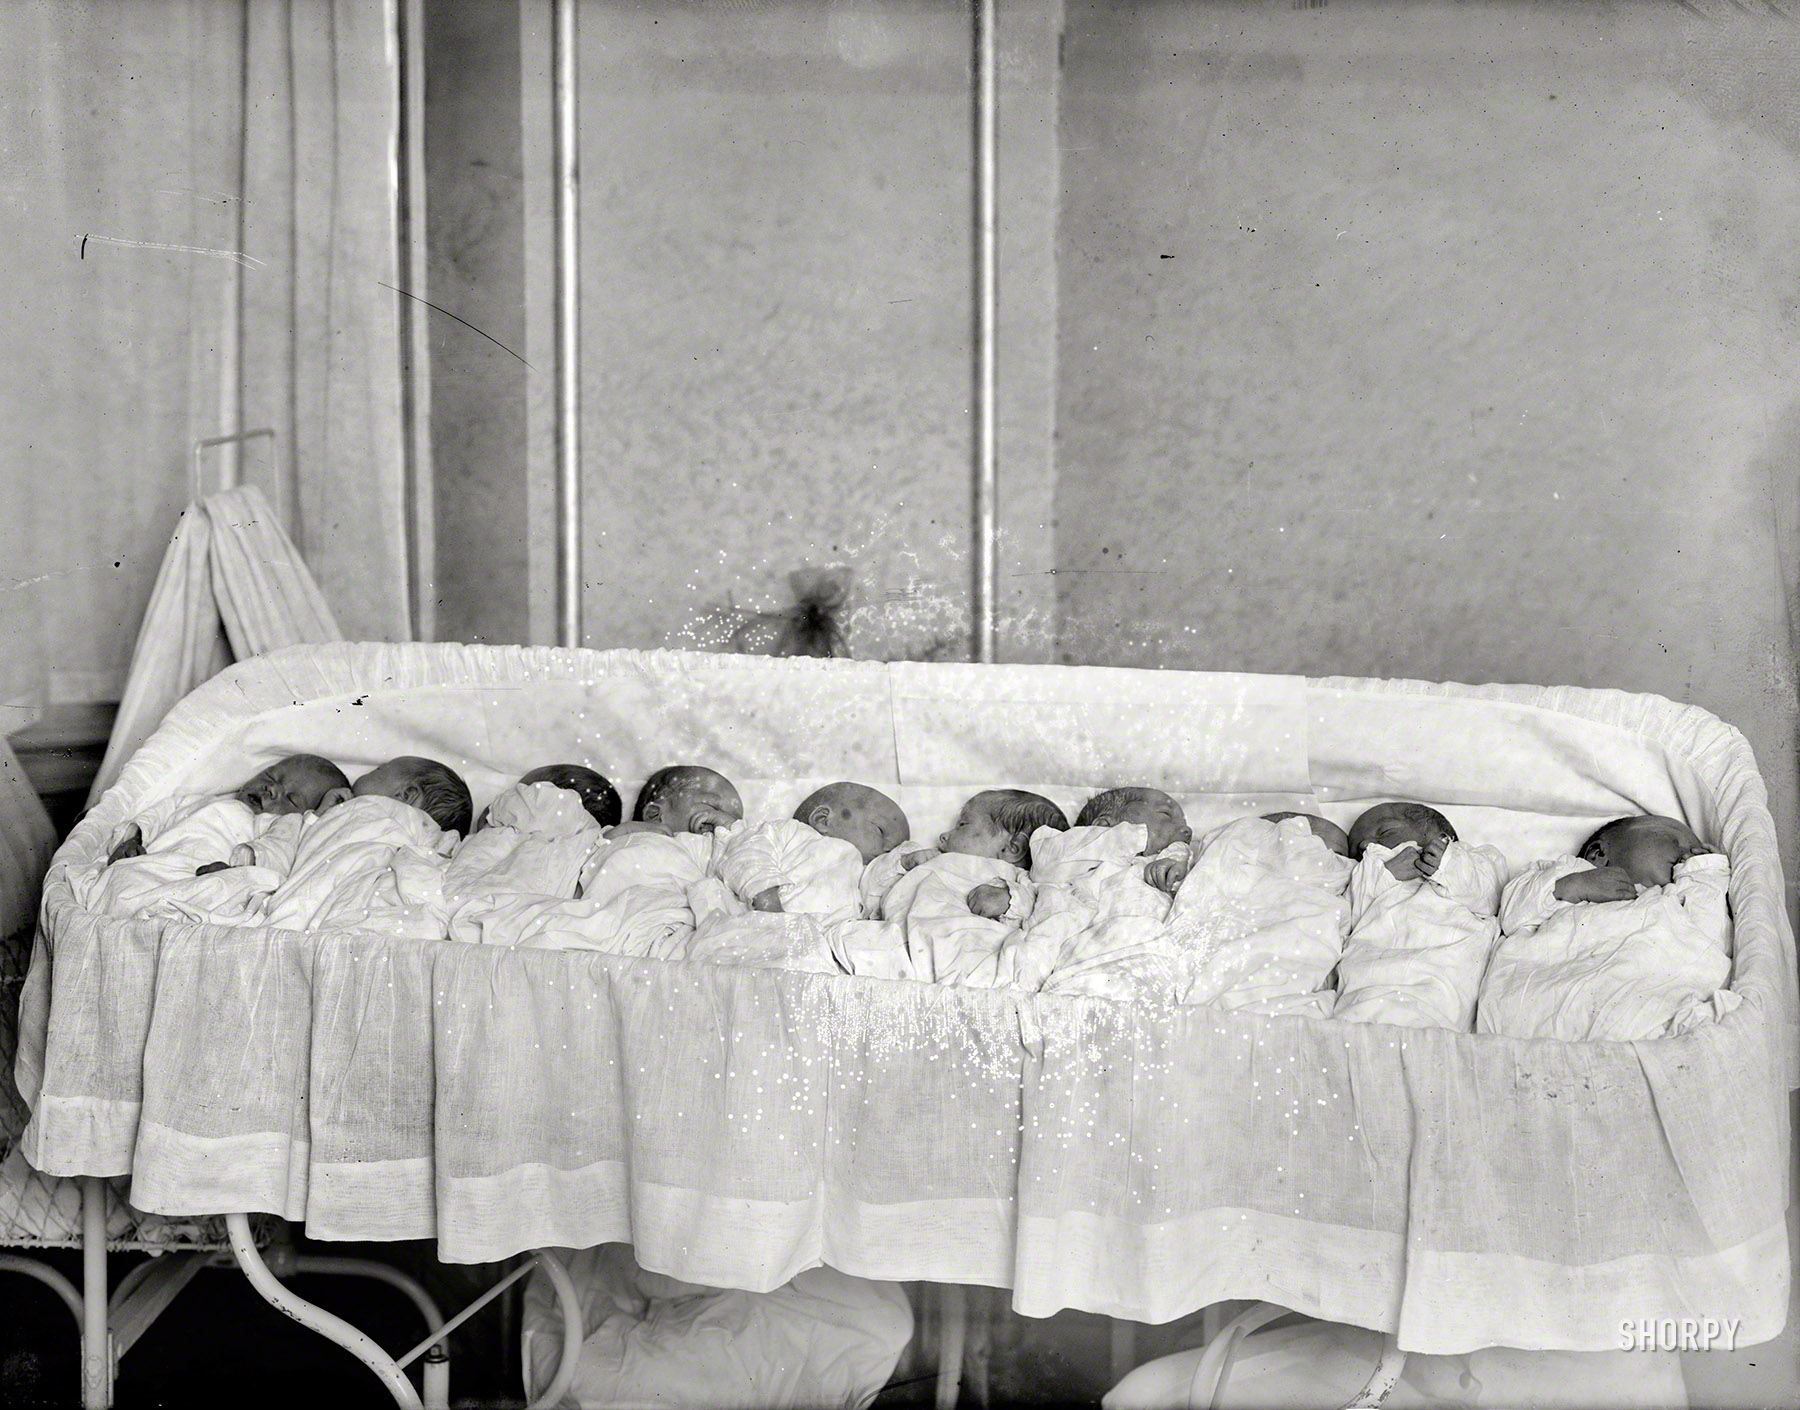 Washington, D.C., circa 1925. "Sibley Hospital babies." Now what did we do with that box of cigars? National Photo Company glass negative. View full size.